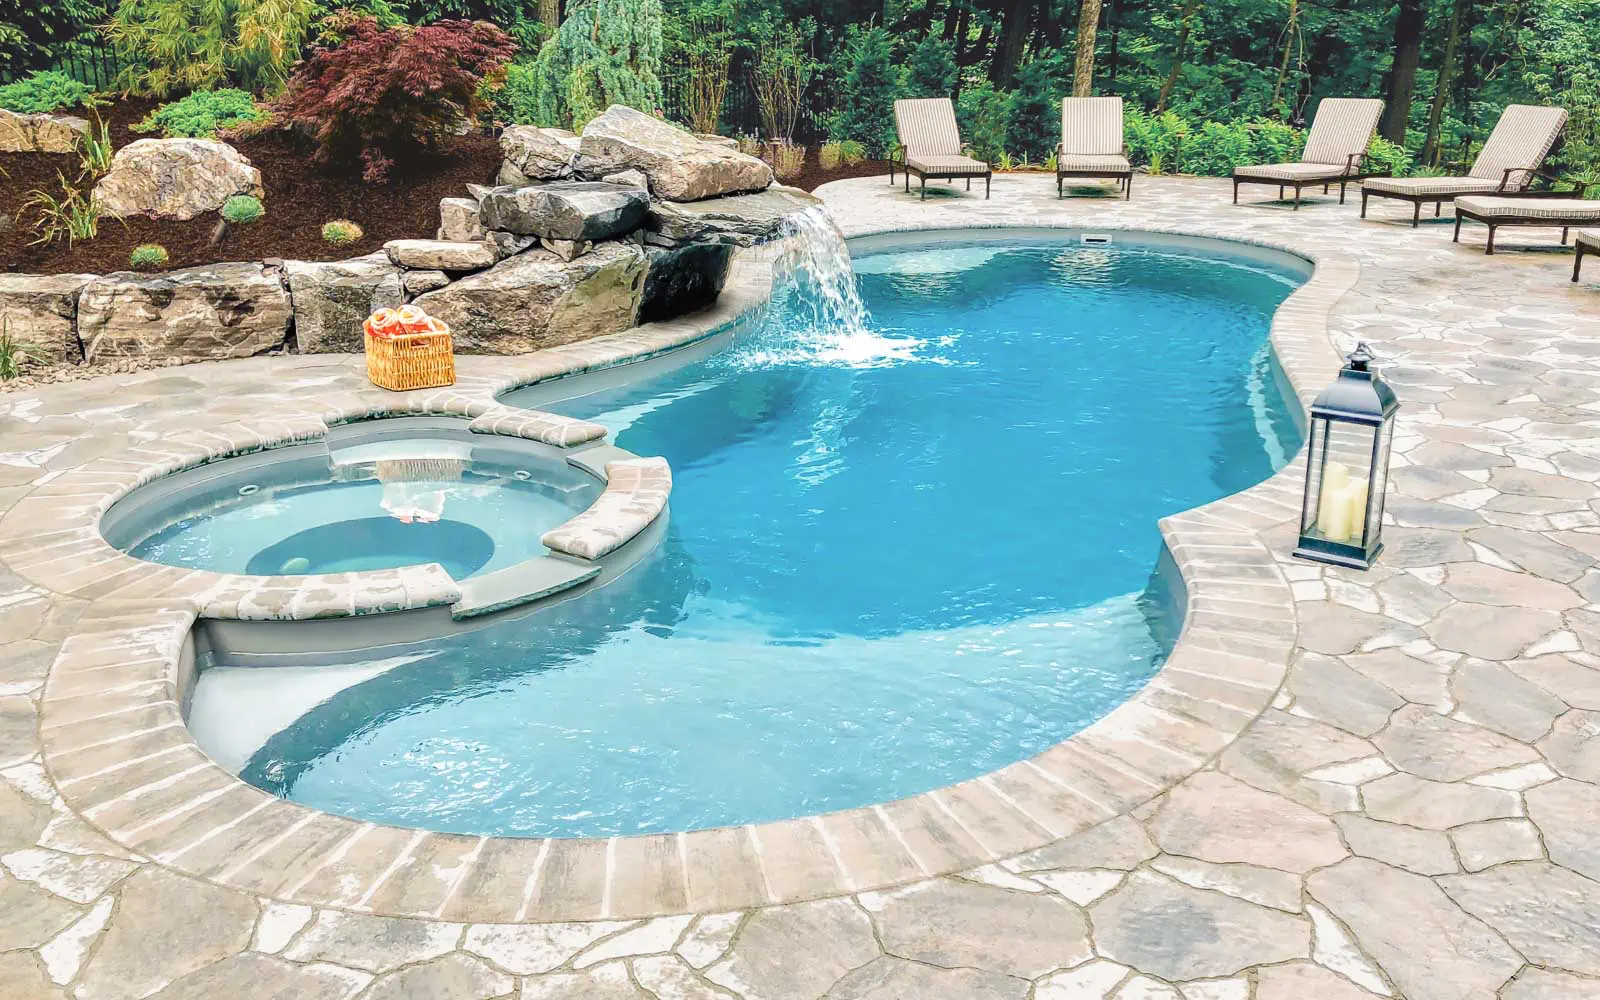 The Allure, a fiberglass pool design manufactured by Leisure Pools